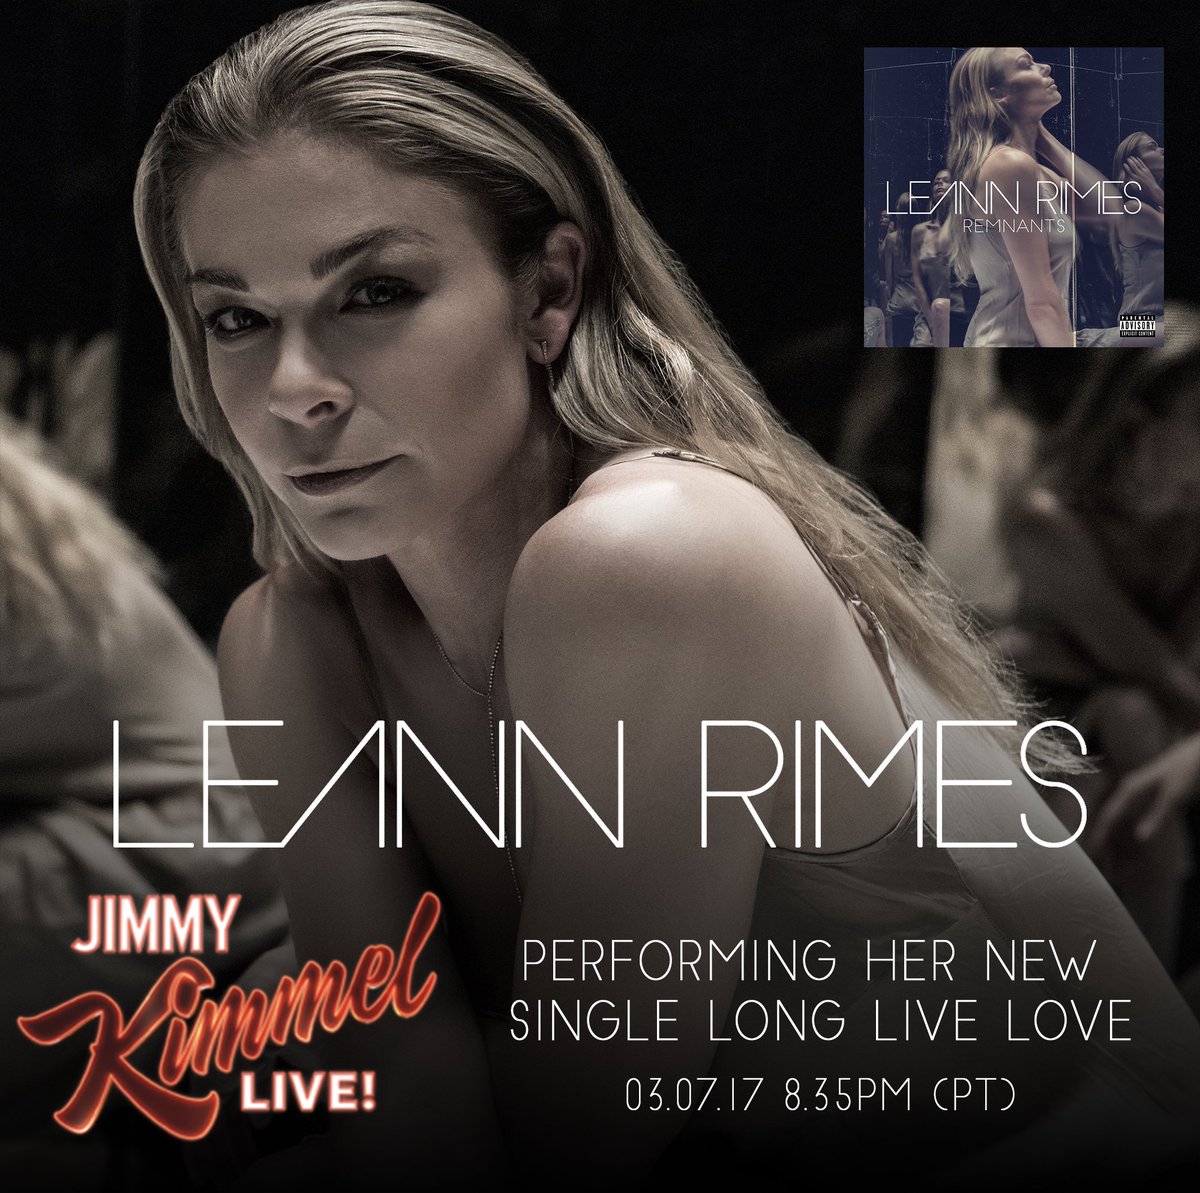 I’m heading to @JimmyKimmelLive to perform #LongLiveLove tomorrow. Tune in from 8.35pm (PT) ???????????? https://t.co/IoCODOX3wO